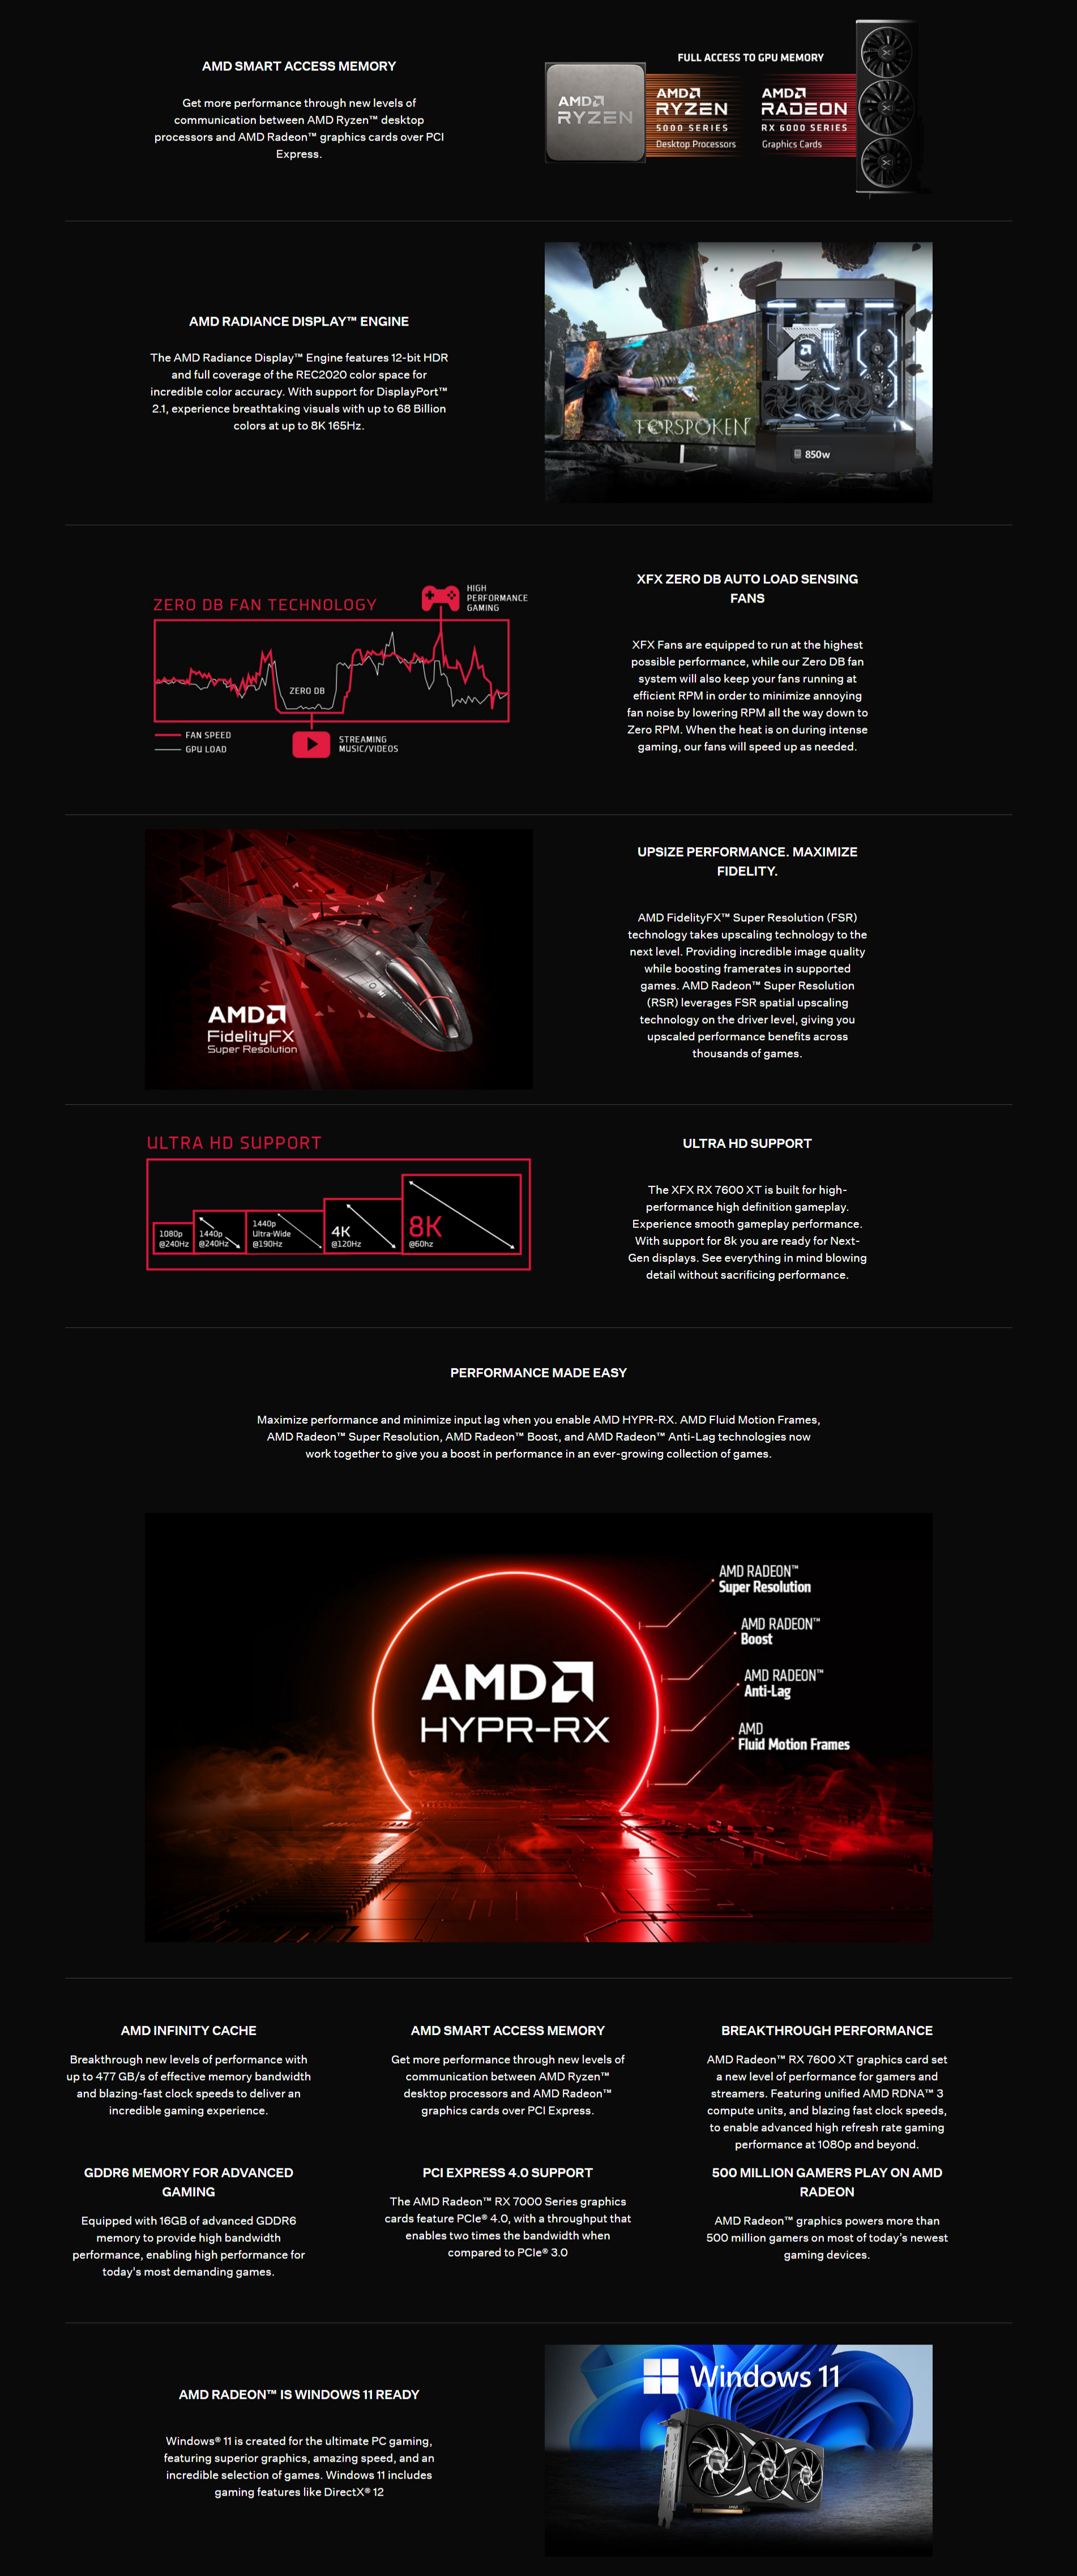 A large marketing image providing additional information about the product XFX Radeon RX 7600 XT Speedster SWFT 210 16GB GDDR6 - Additional alt info not provided